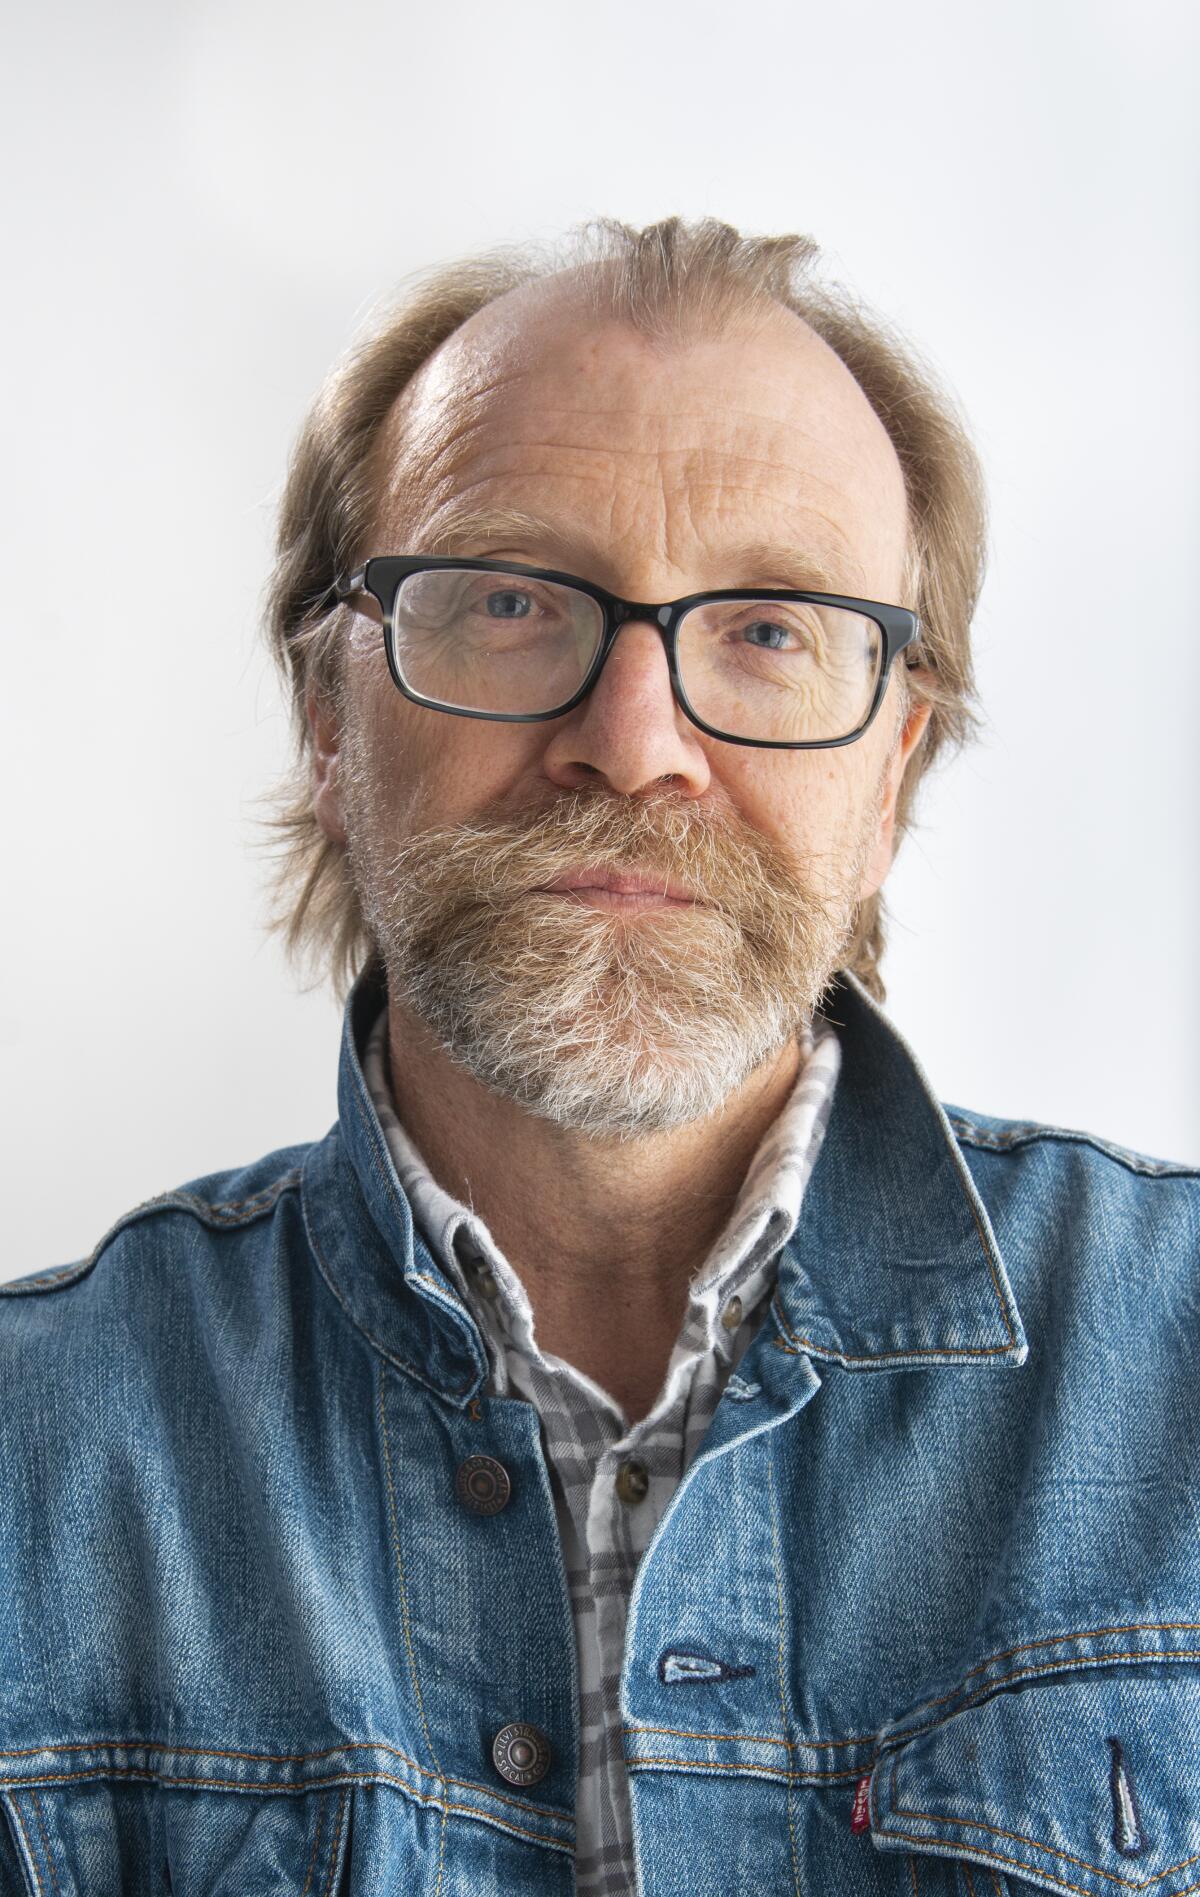 A man in glasses and a denim jacket